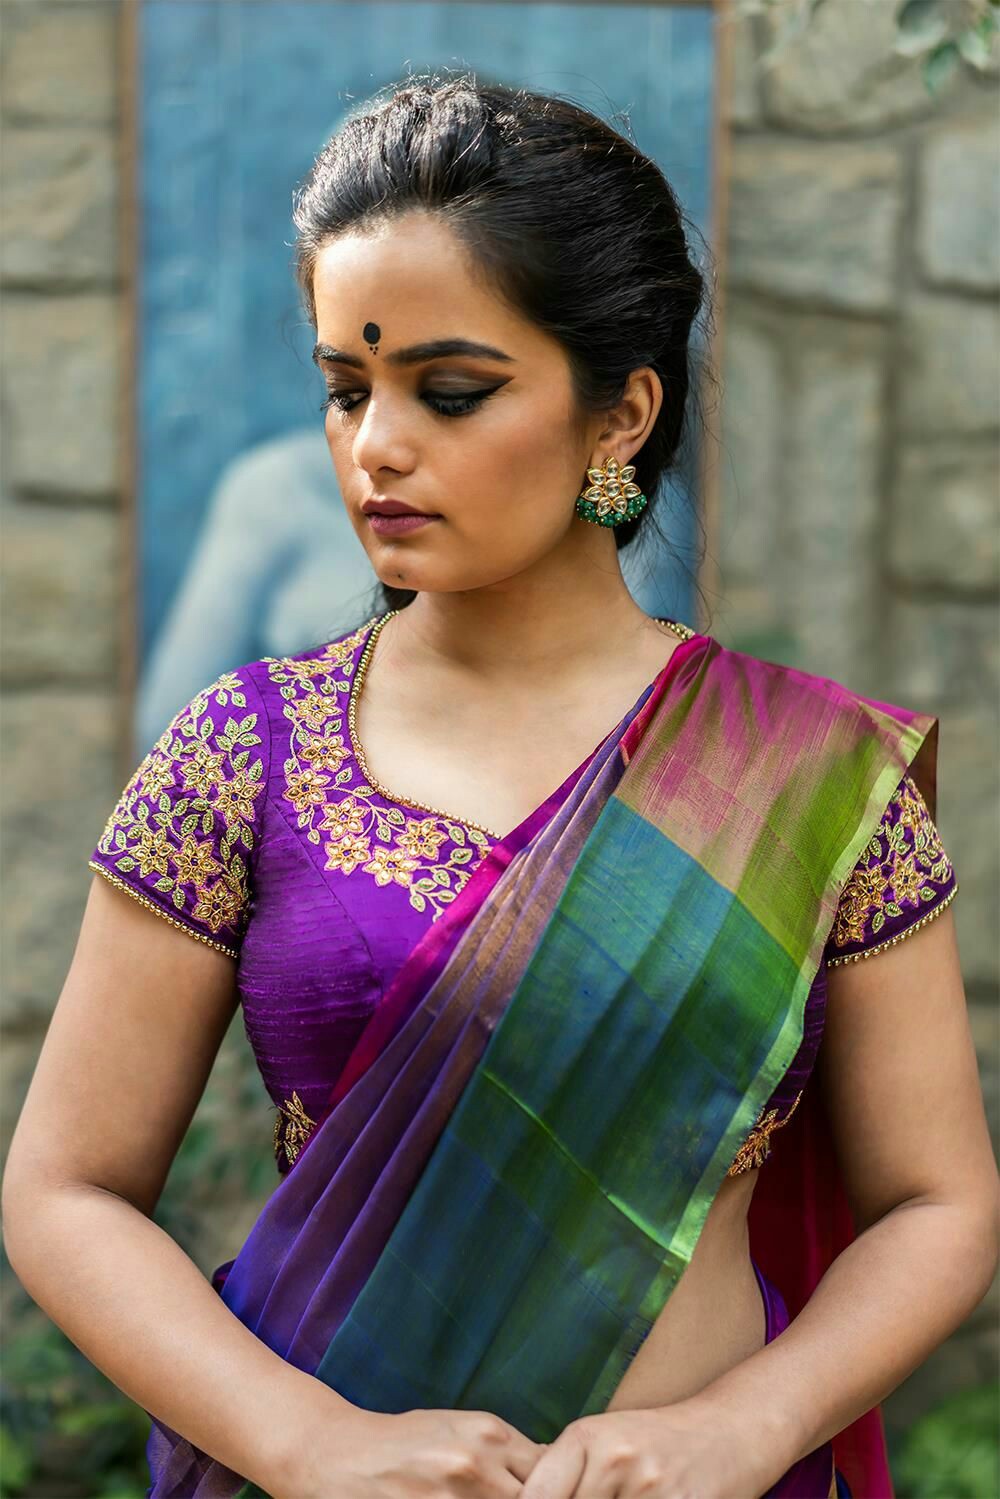 Great Looking Indian Models in Saree- HD Photo Gallery!